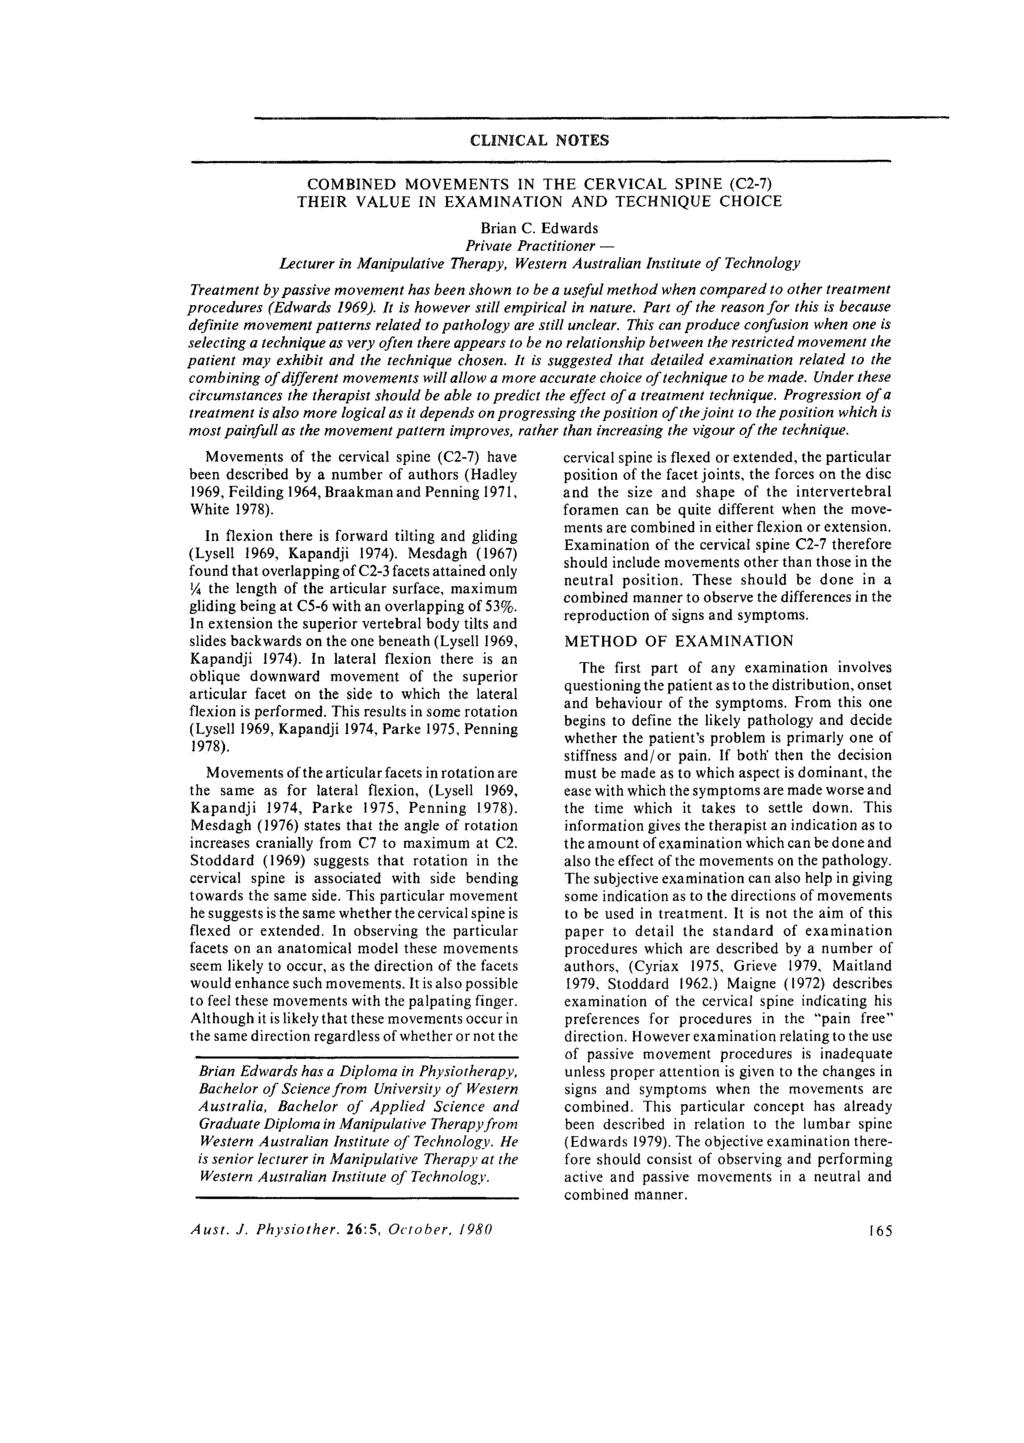 CLINICAL NOTES COMBINED MOVEMENTS IN THE CERVICAL SPINE (C2-7) THEIR VALUE IN EXAMINATION AND TECHNIQUE CHOICE Brian C.